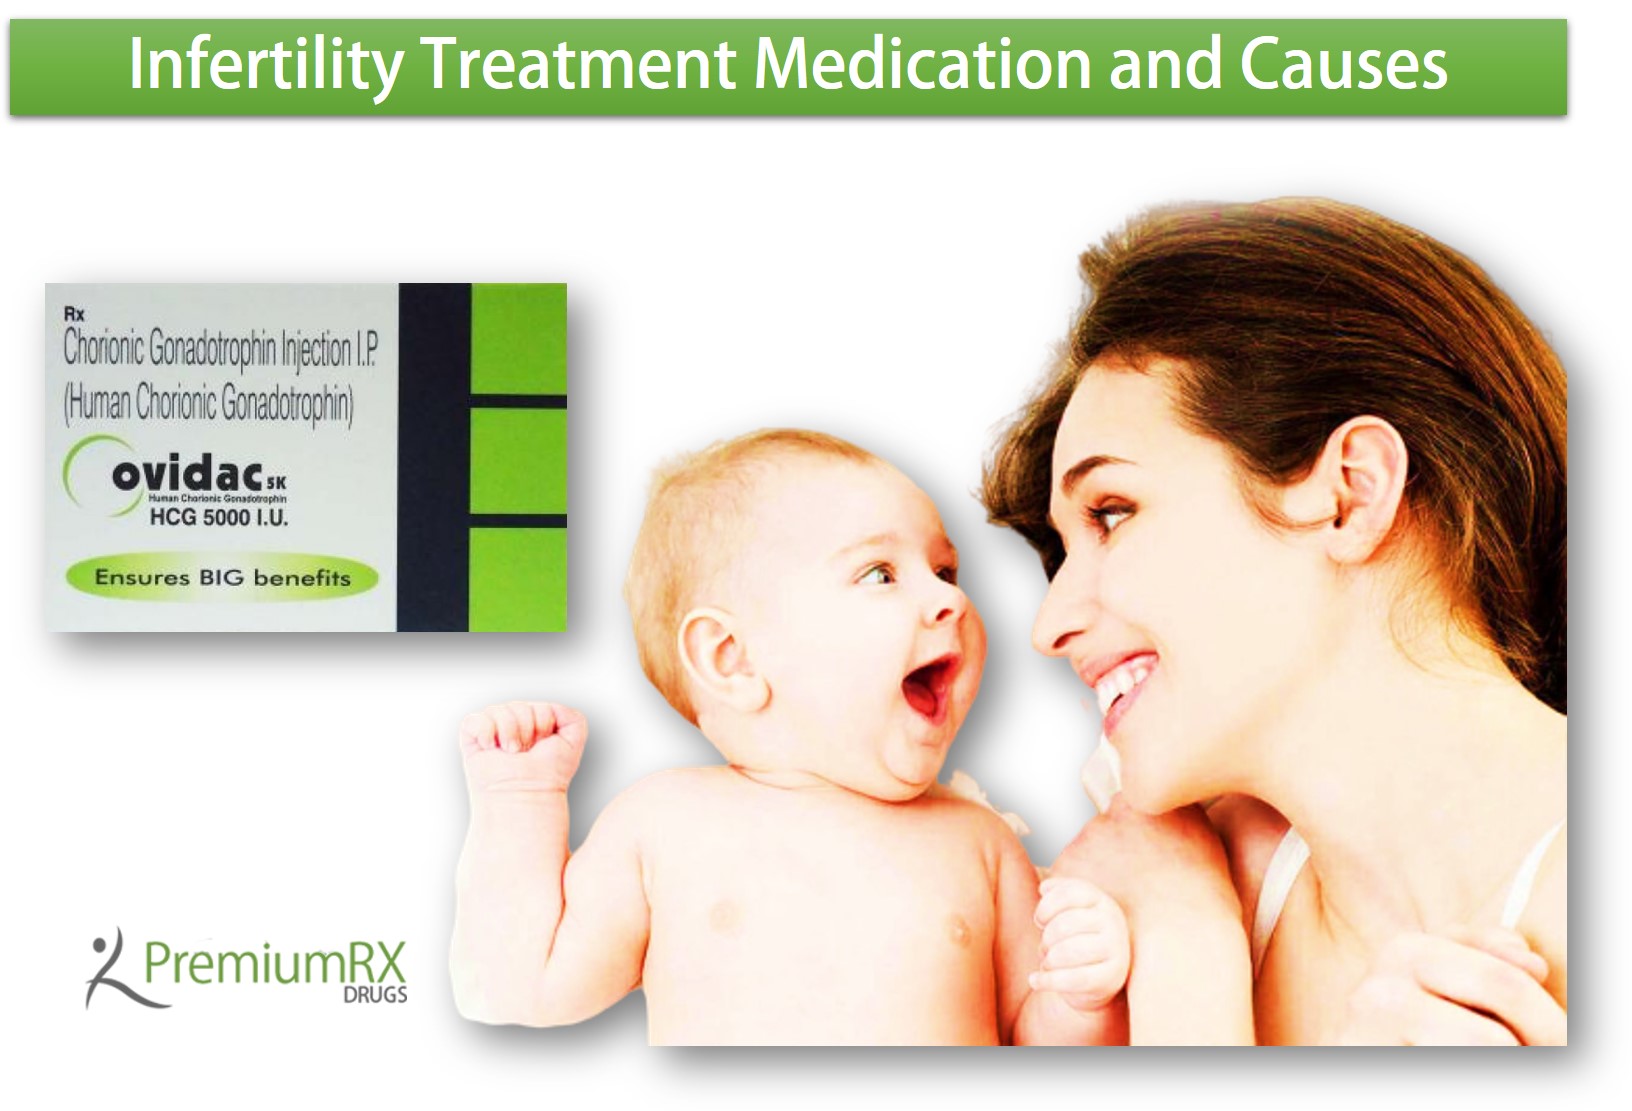 Infertility Treatment Medication and Causes